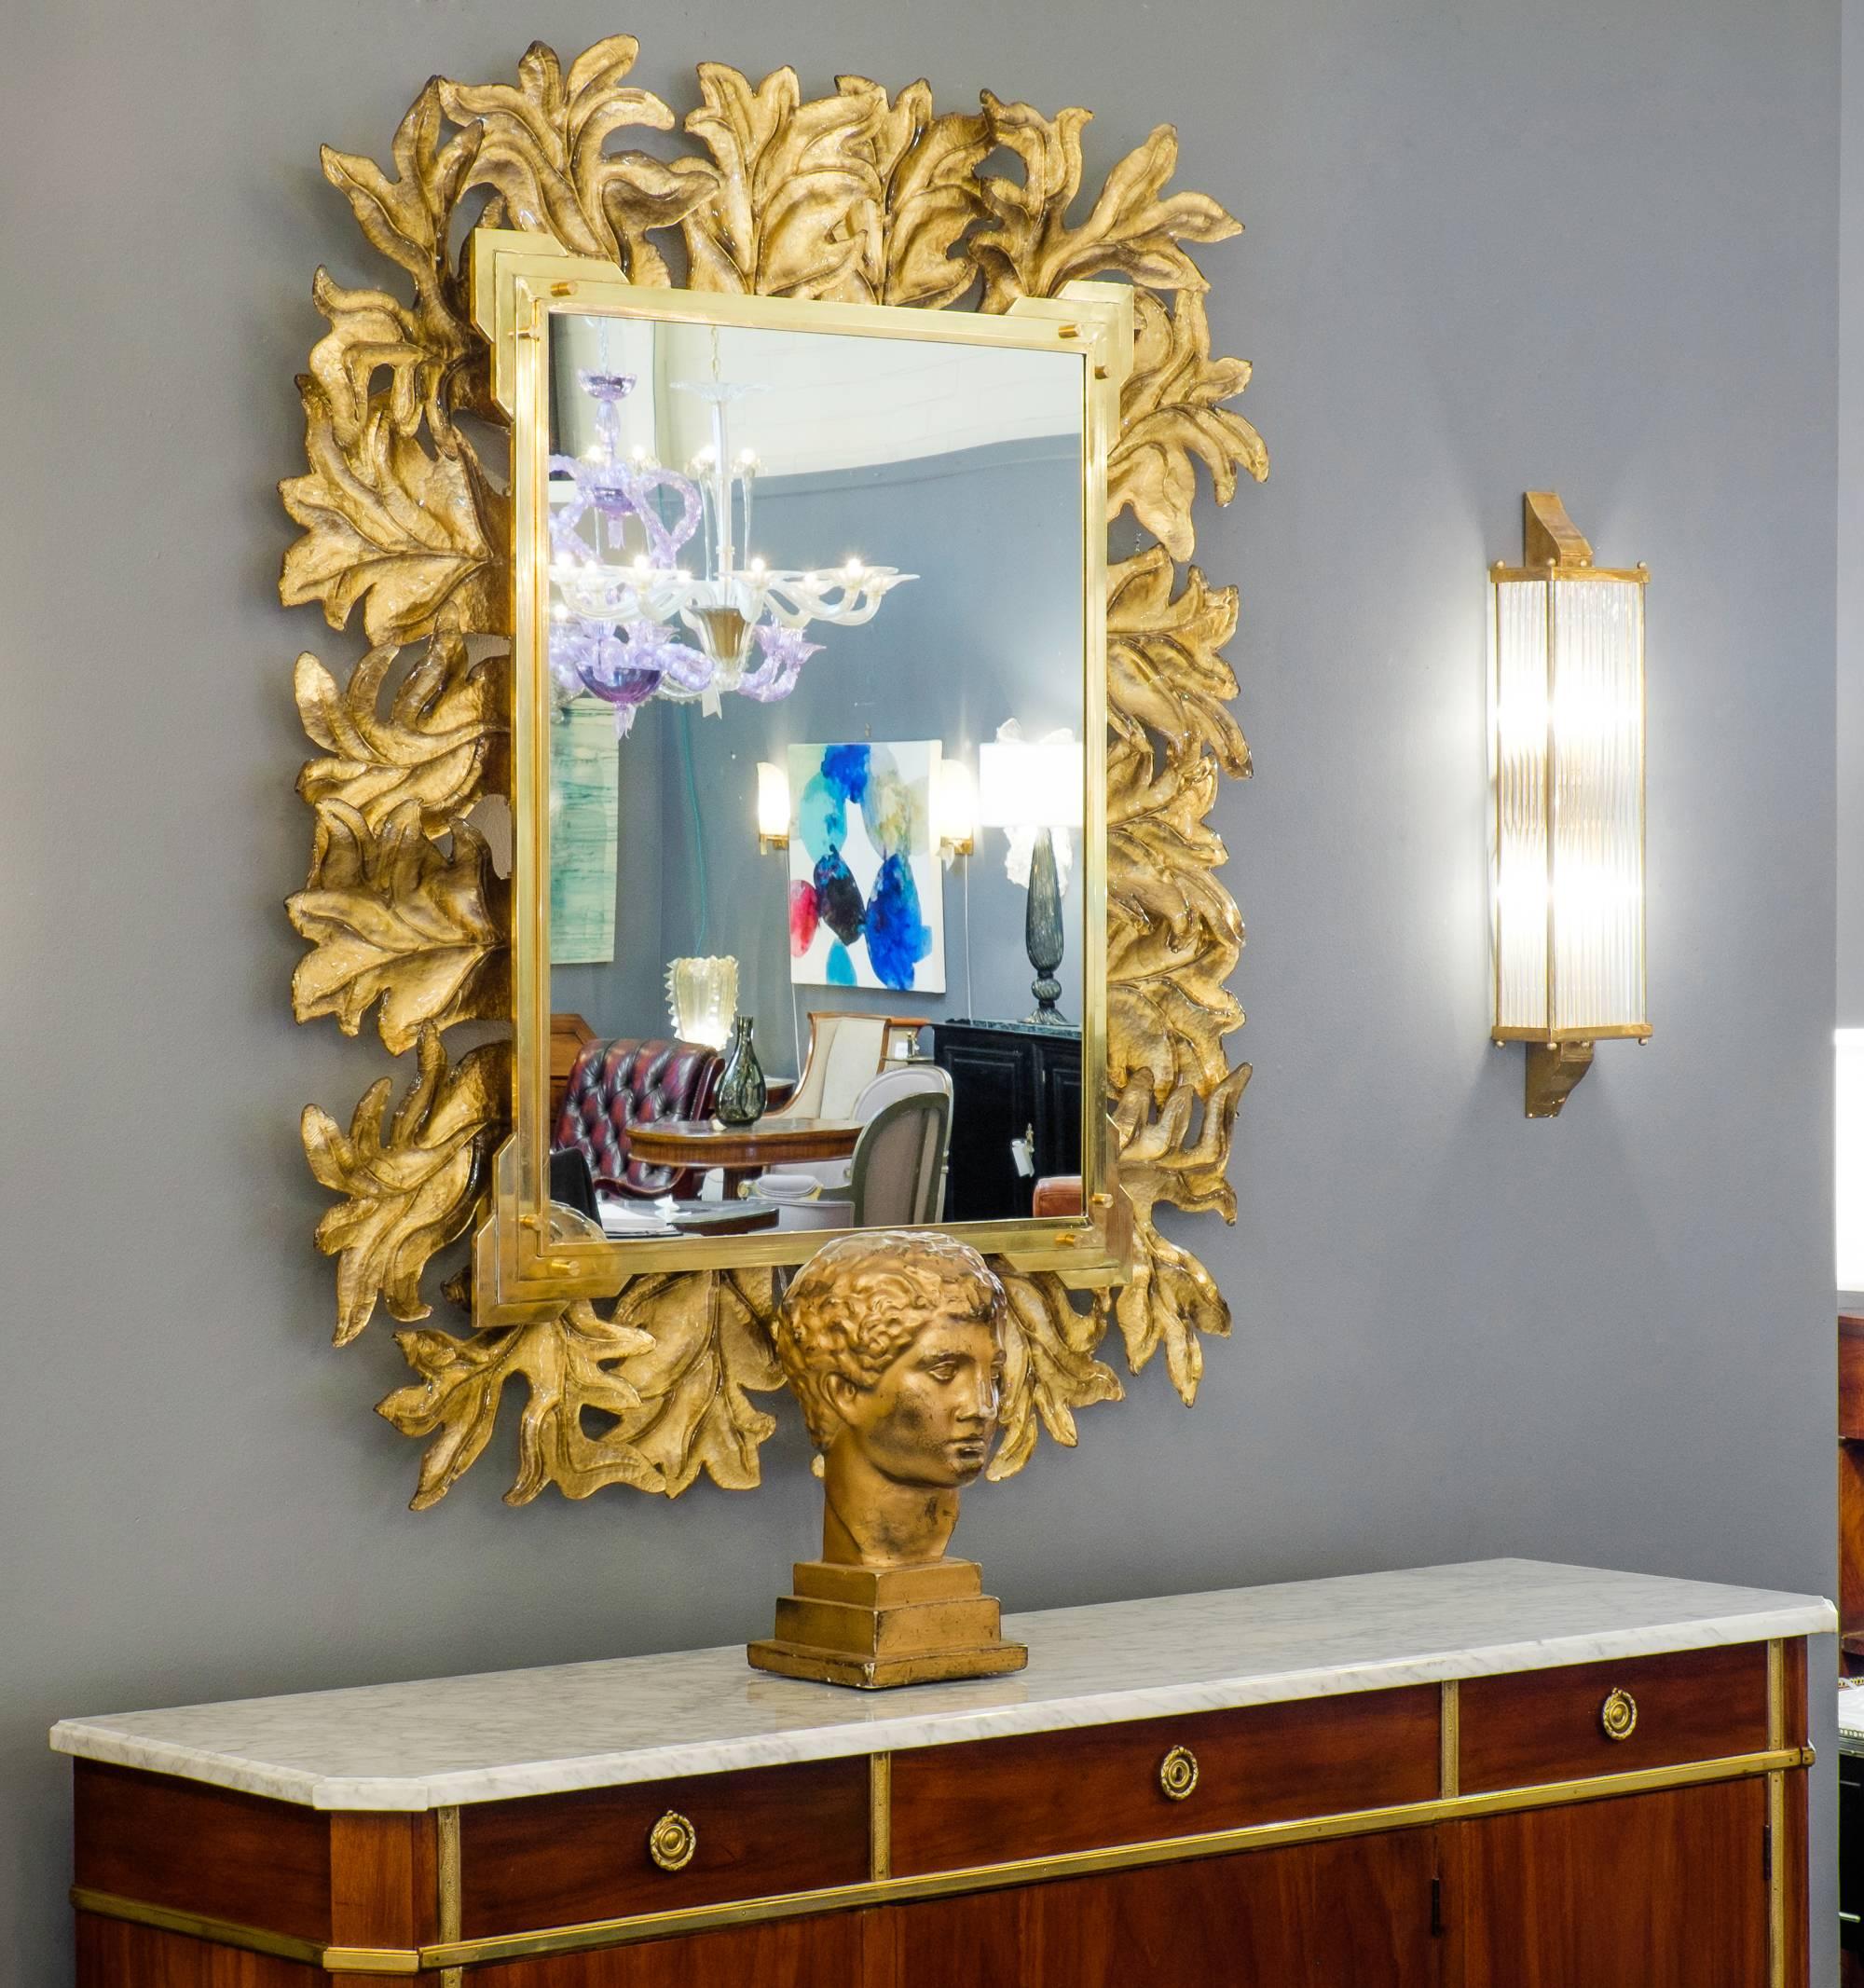 An exceptional large Murano glass gold leaf and brass mirror that takes the main stage in any room. Composed of separate gold leaf fused glass pieces that fit together in a beautiful visual chorus of foliage layers. The frame is complimented